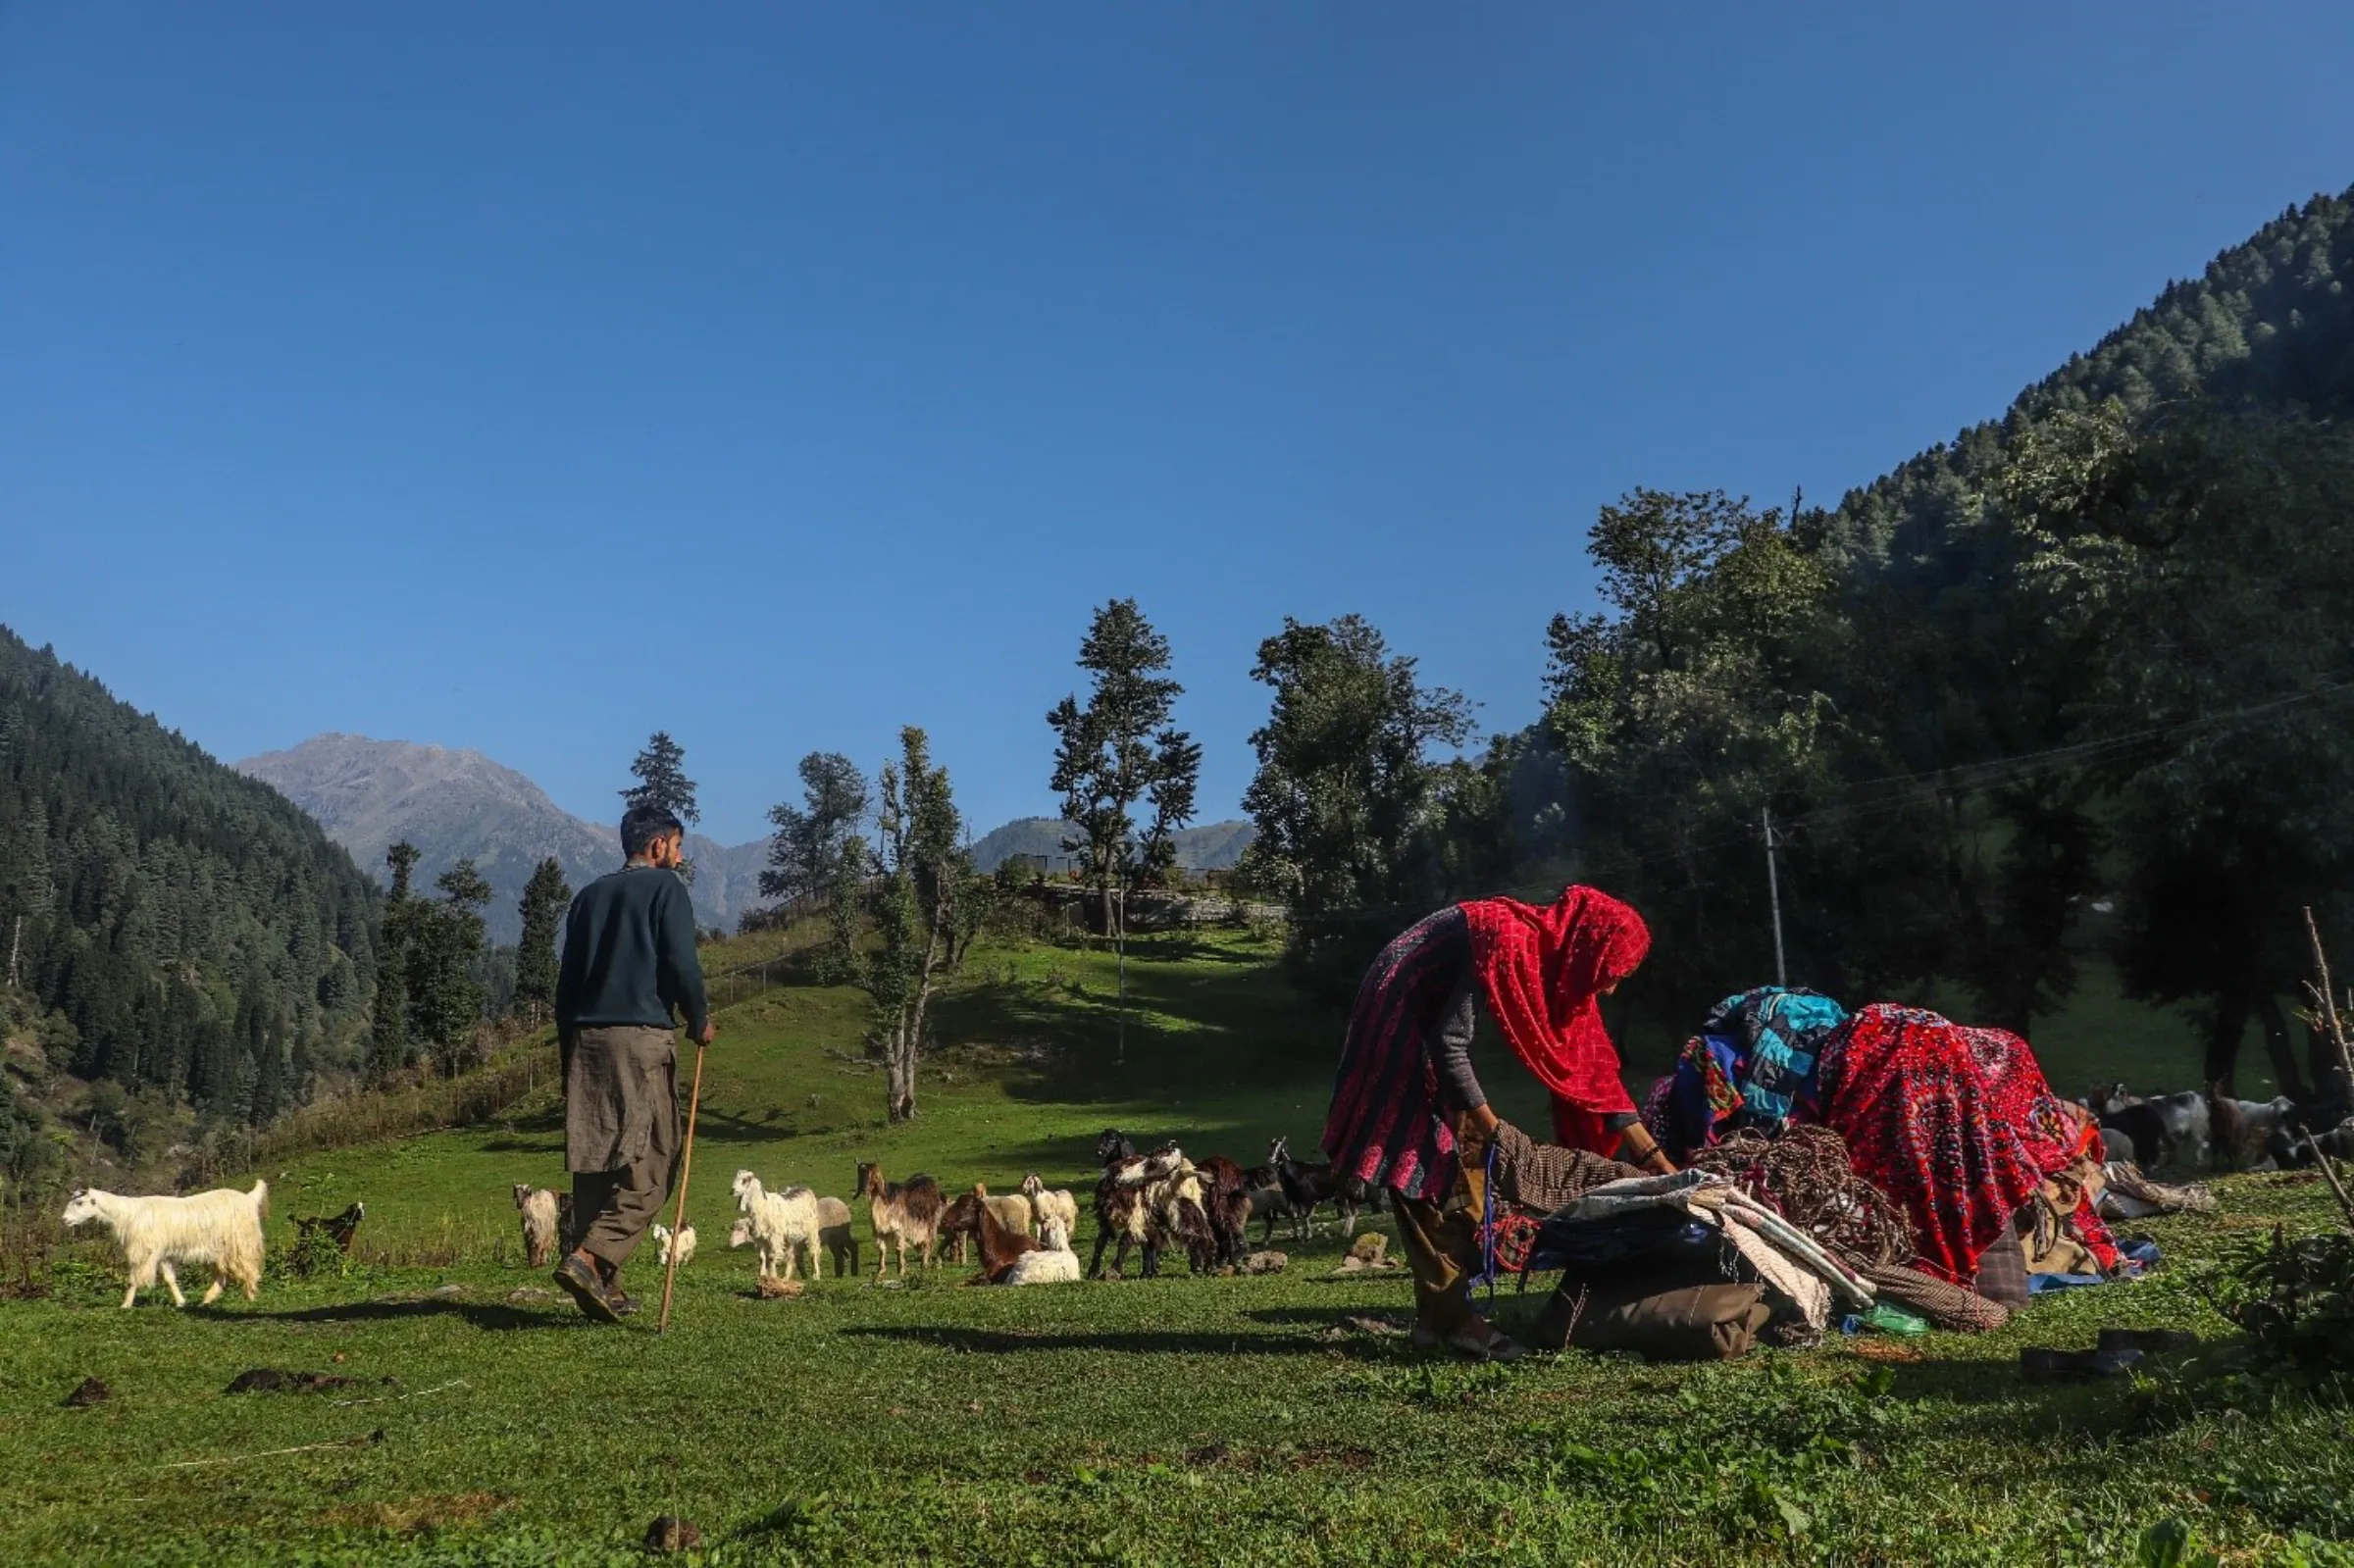 A nomadic family pack up their goods as they start their return journey back home after spending the summer grazing their livestock on the Himalayan hills of Kashmir, India, Sept. 14, 2022